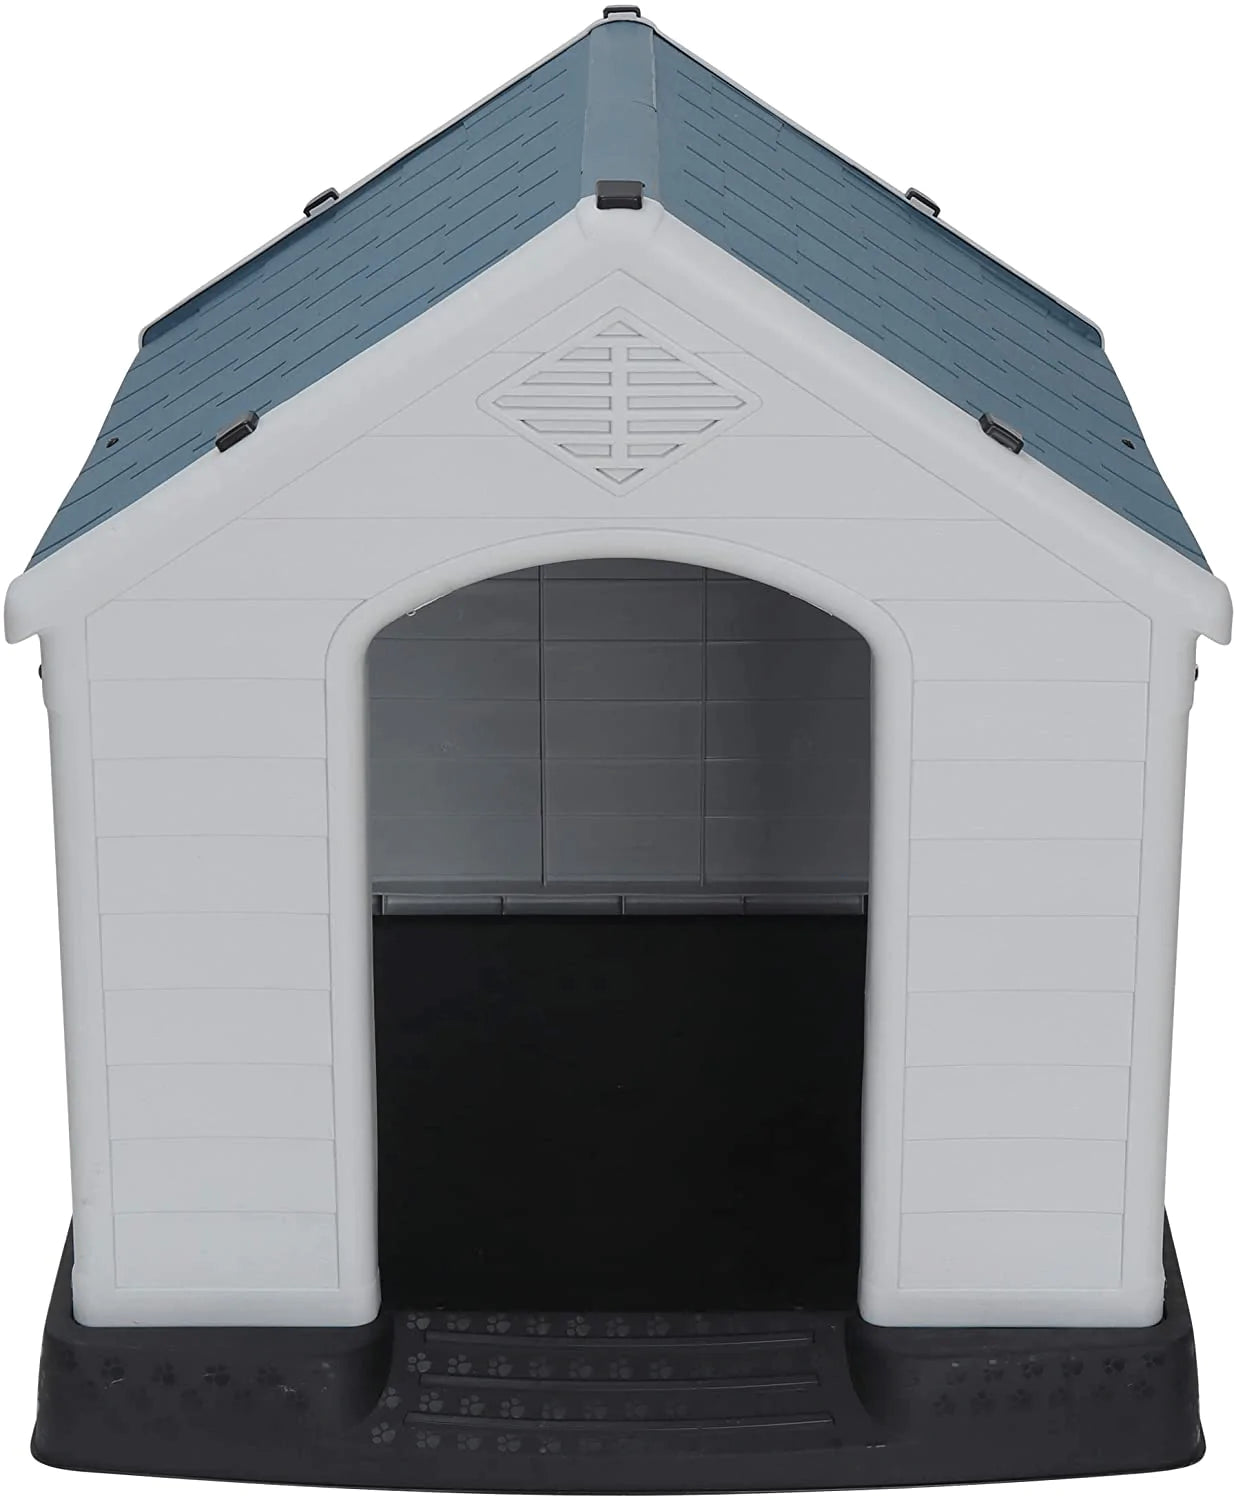 Zenstyle Dog House Medium/Small Pet Kennel Waterproof & Ventilate Shed with Air Vents & Elevated Floor for Outdoor & Indoor